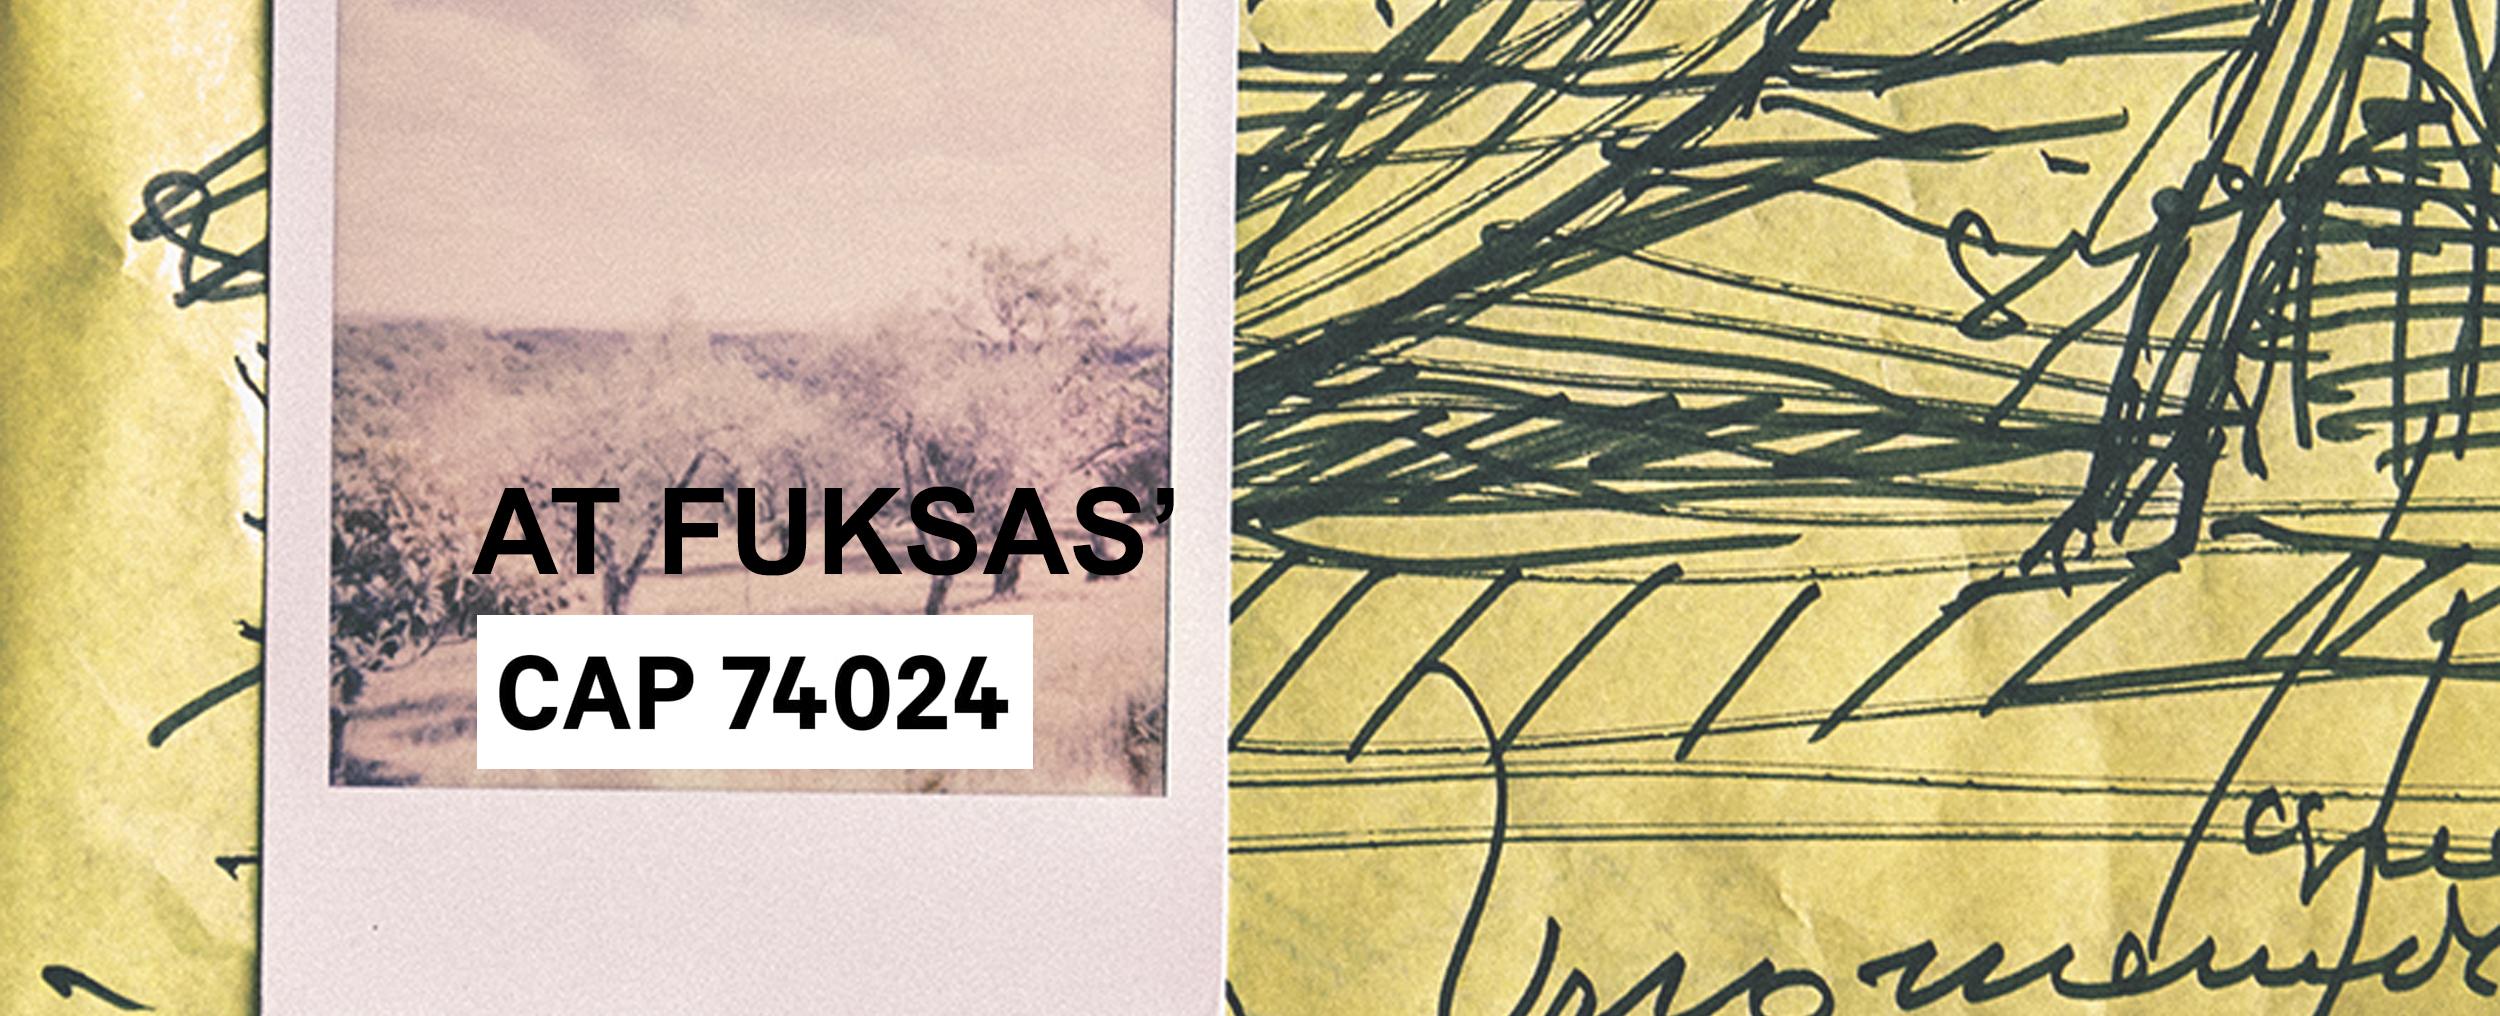 “At Fuksas' – We will dream again”, interview for CAP740242020, July 01